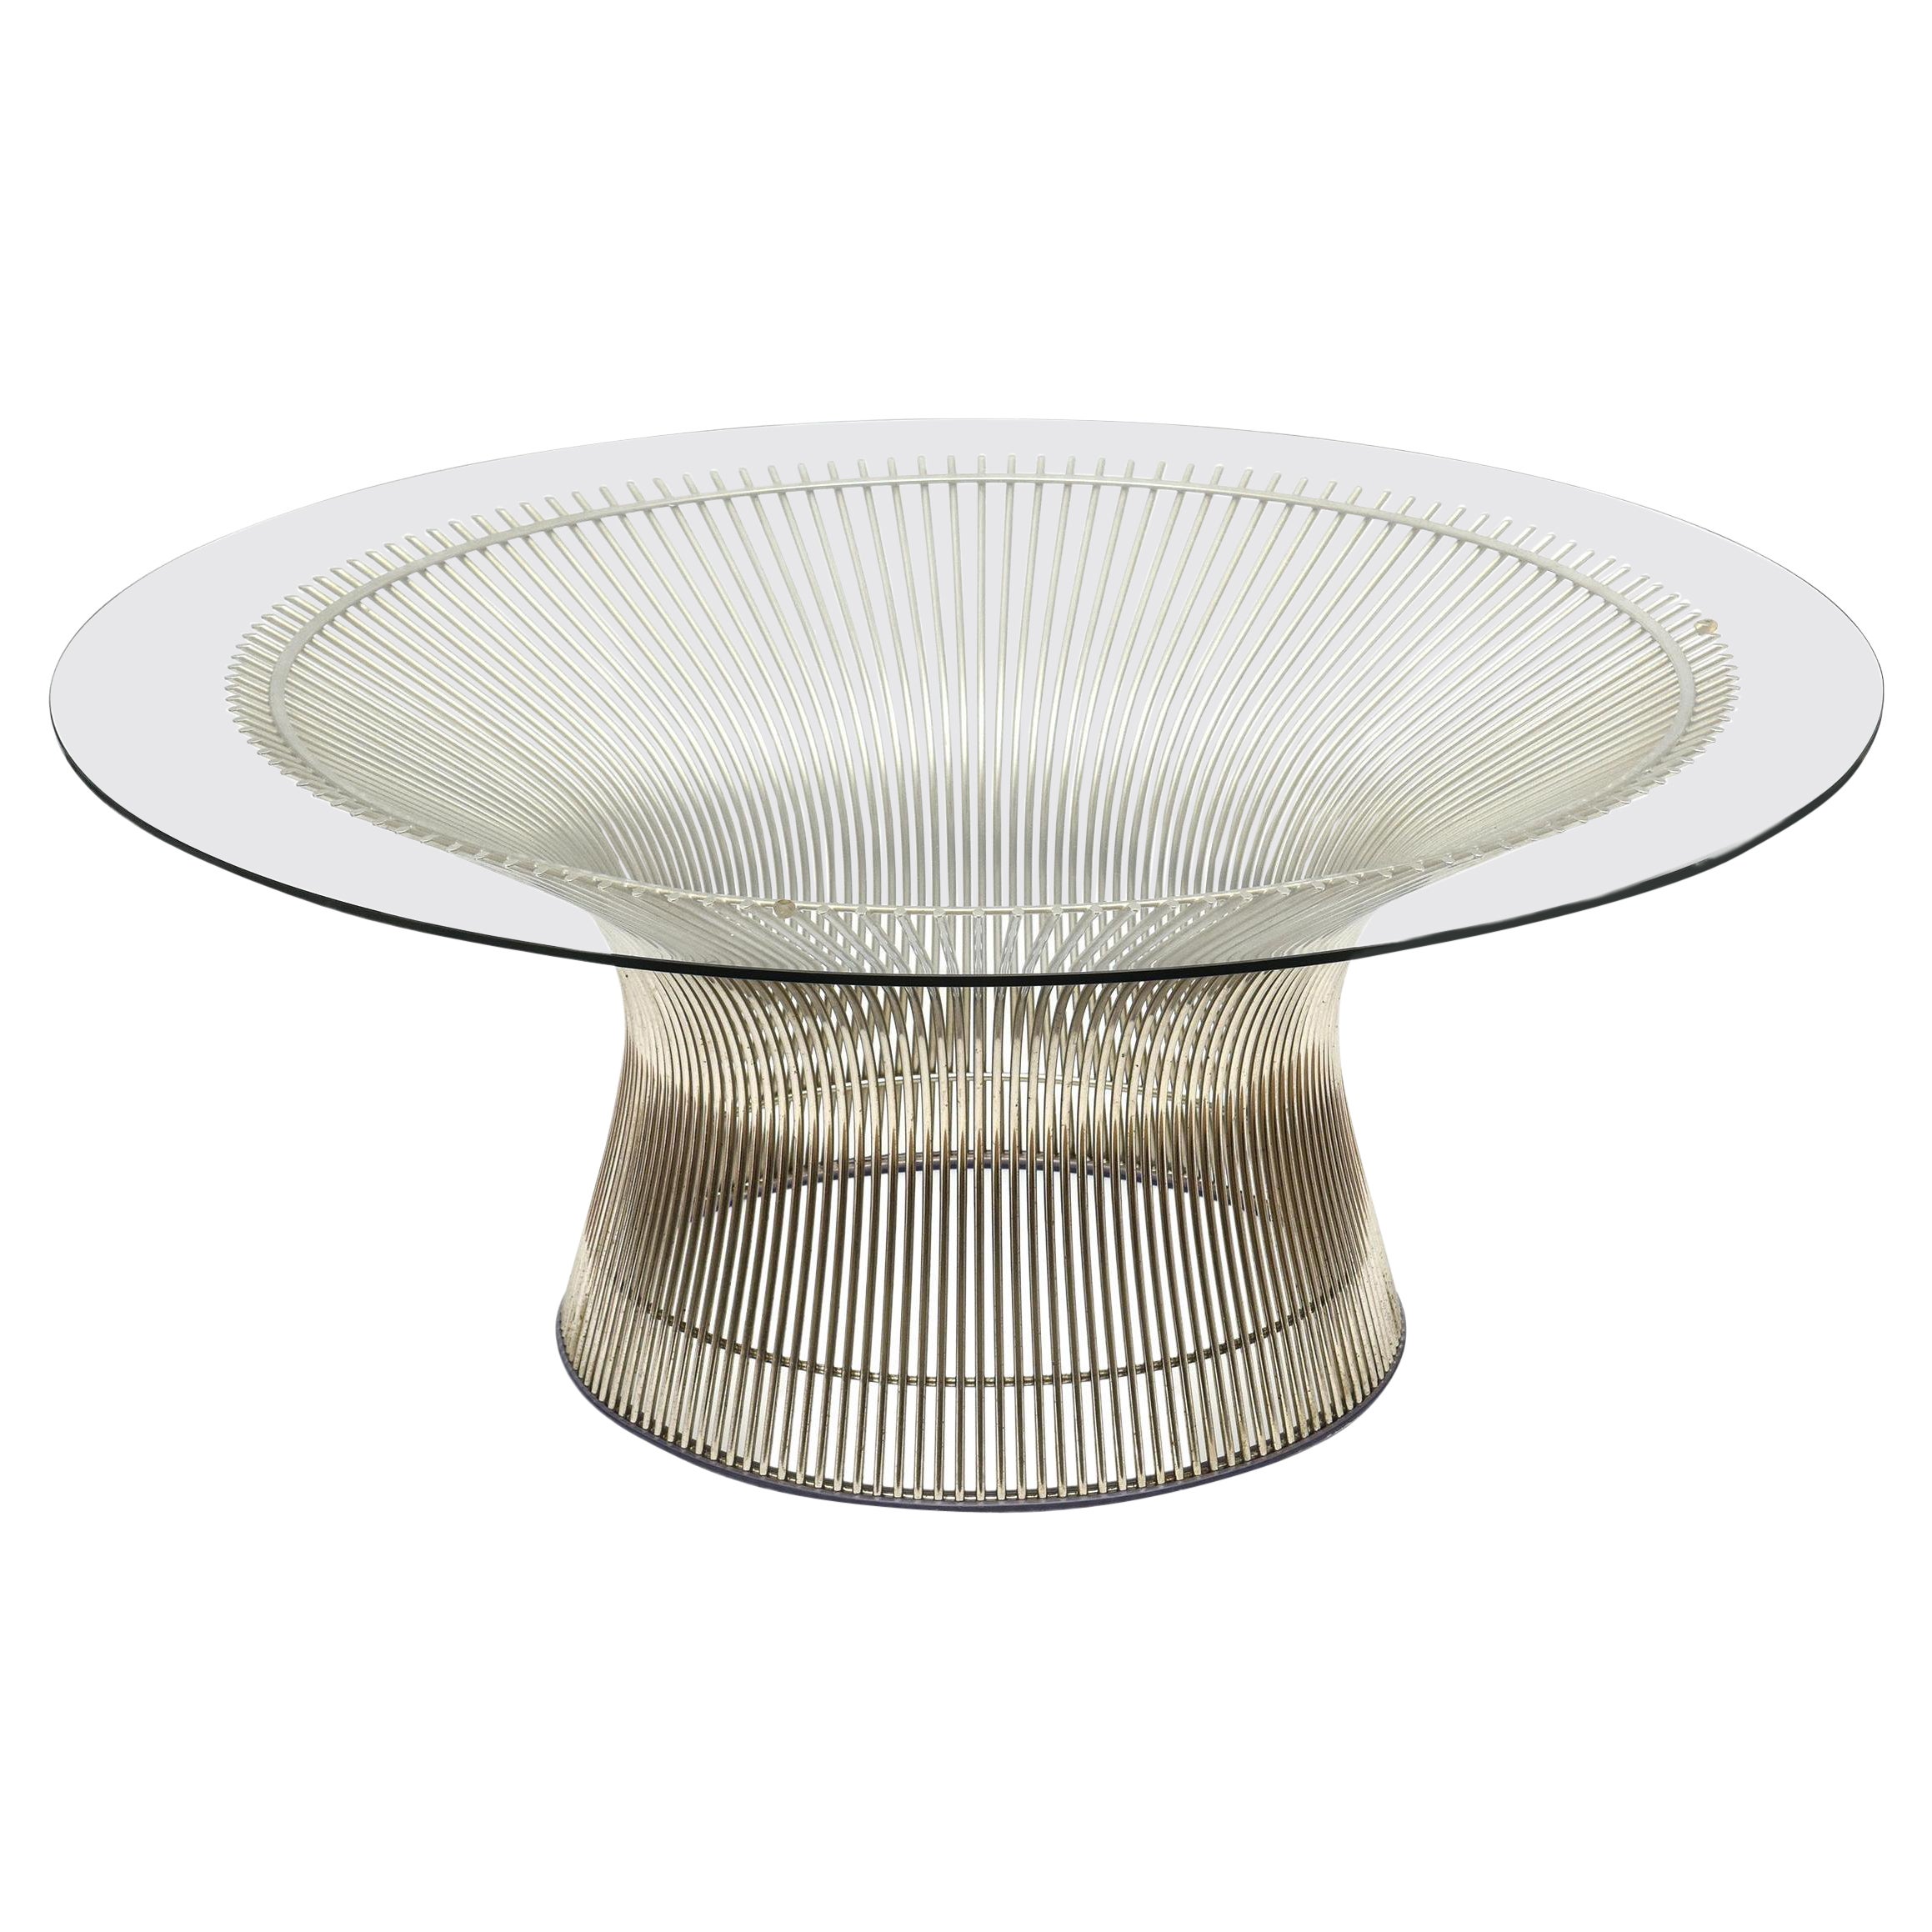 Warren Platner for Knoll Vintage Glass Top Wire Base Cocktail Table Mid Century